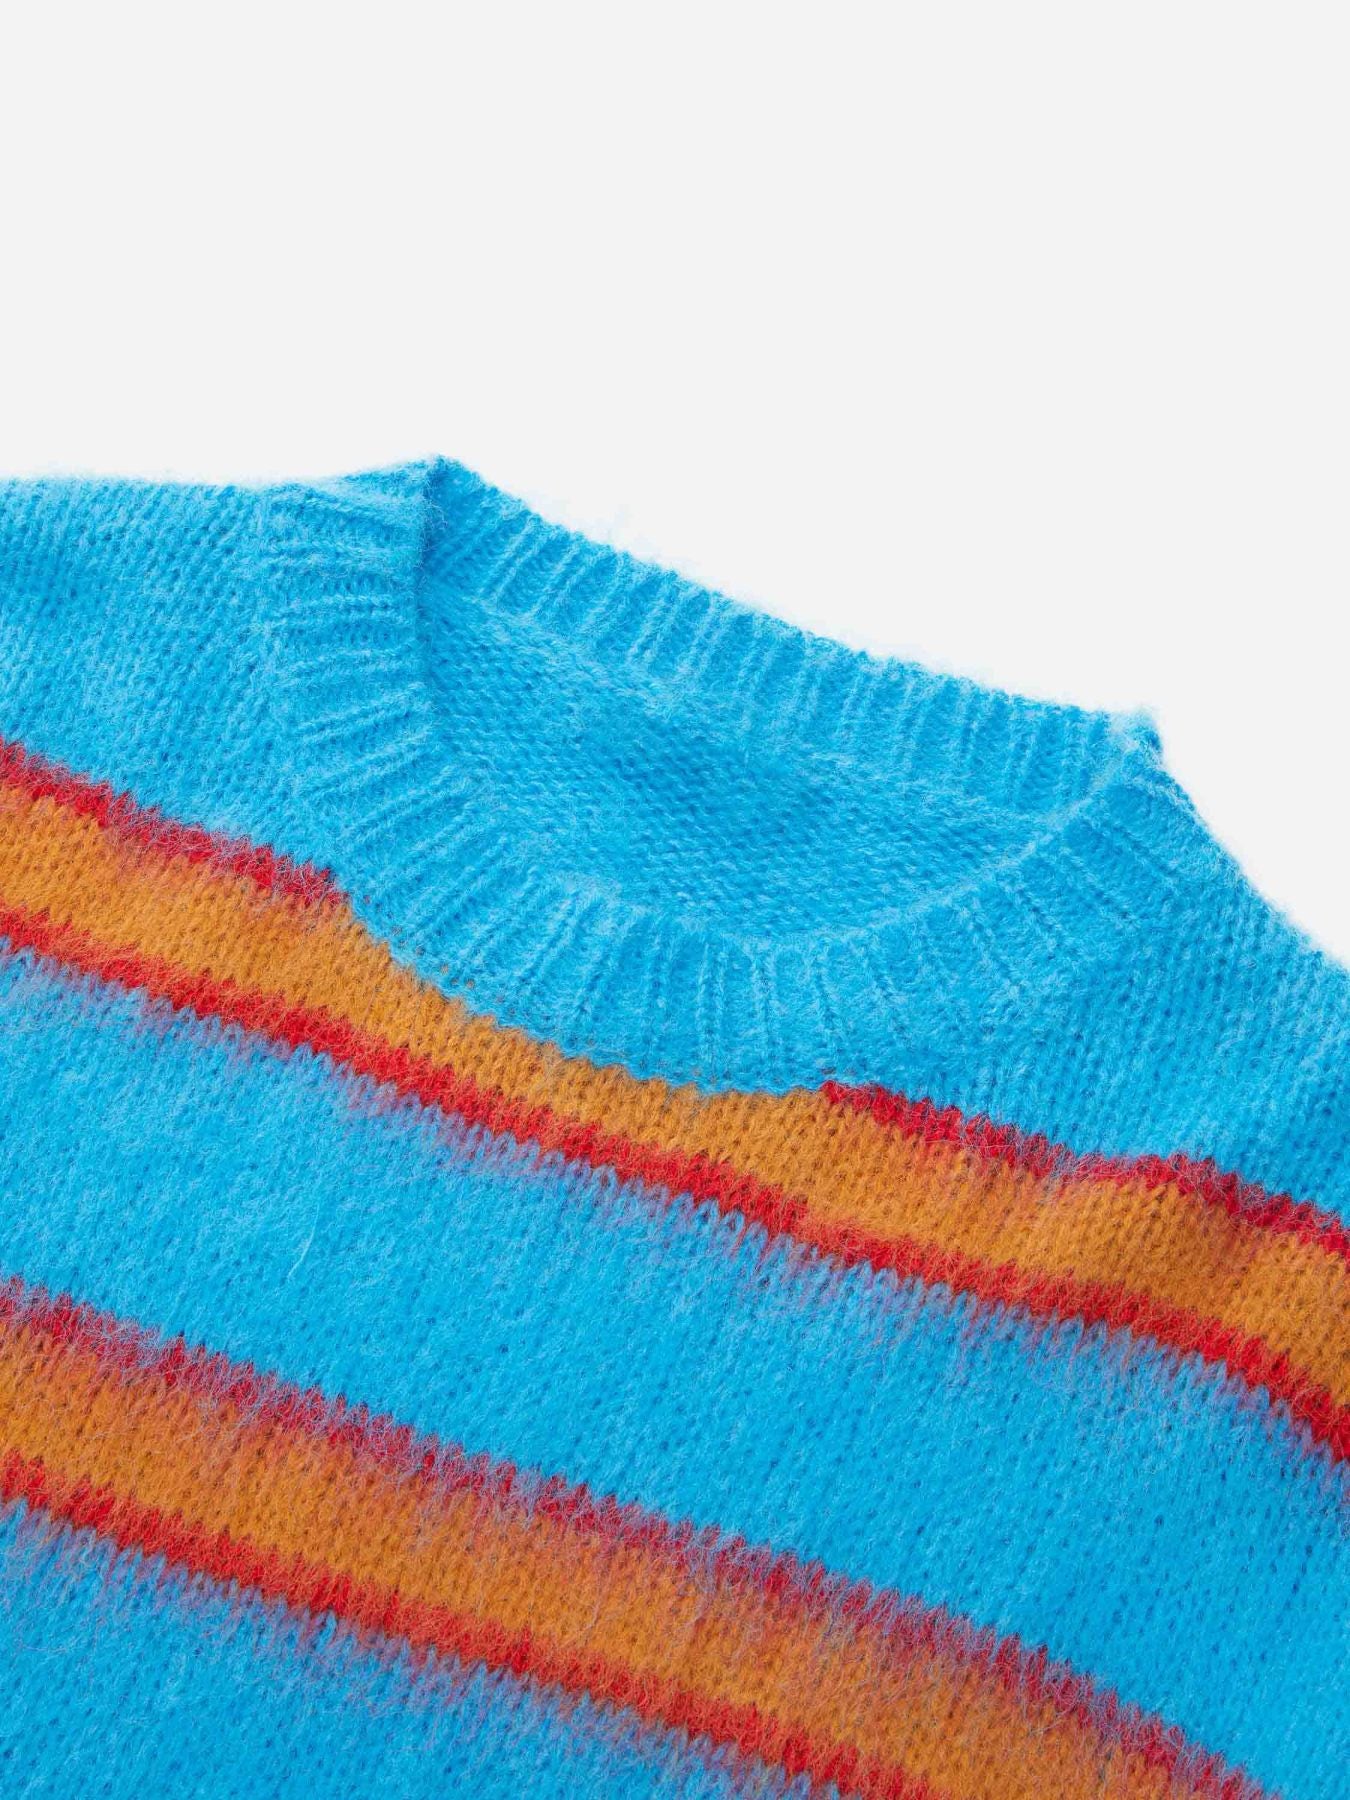 Thesupermade Color Contrast Striped Sweater